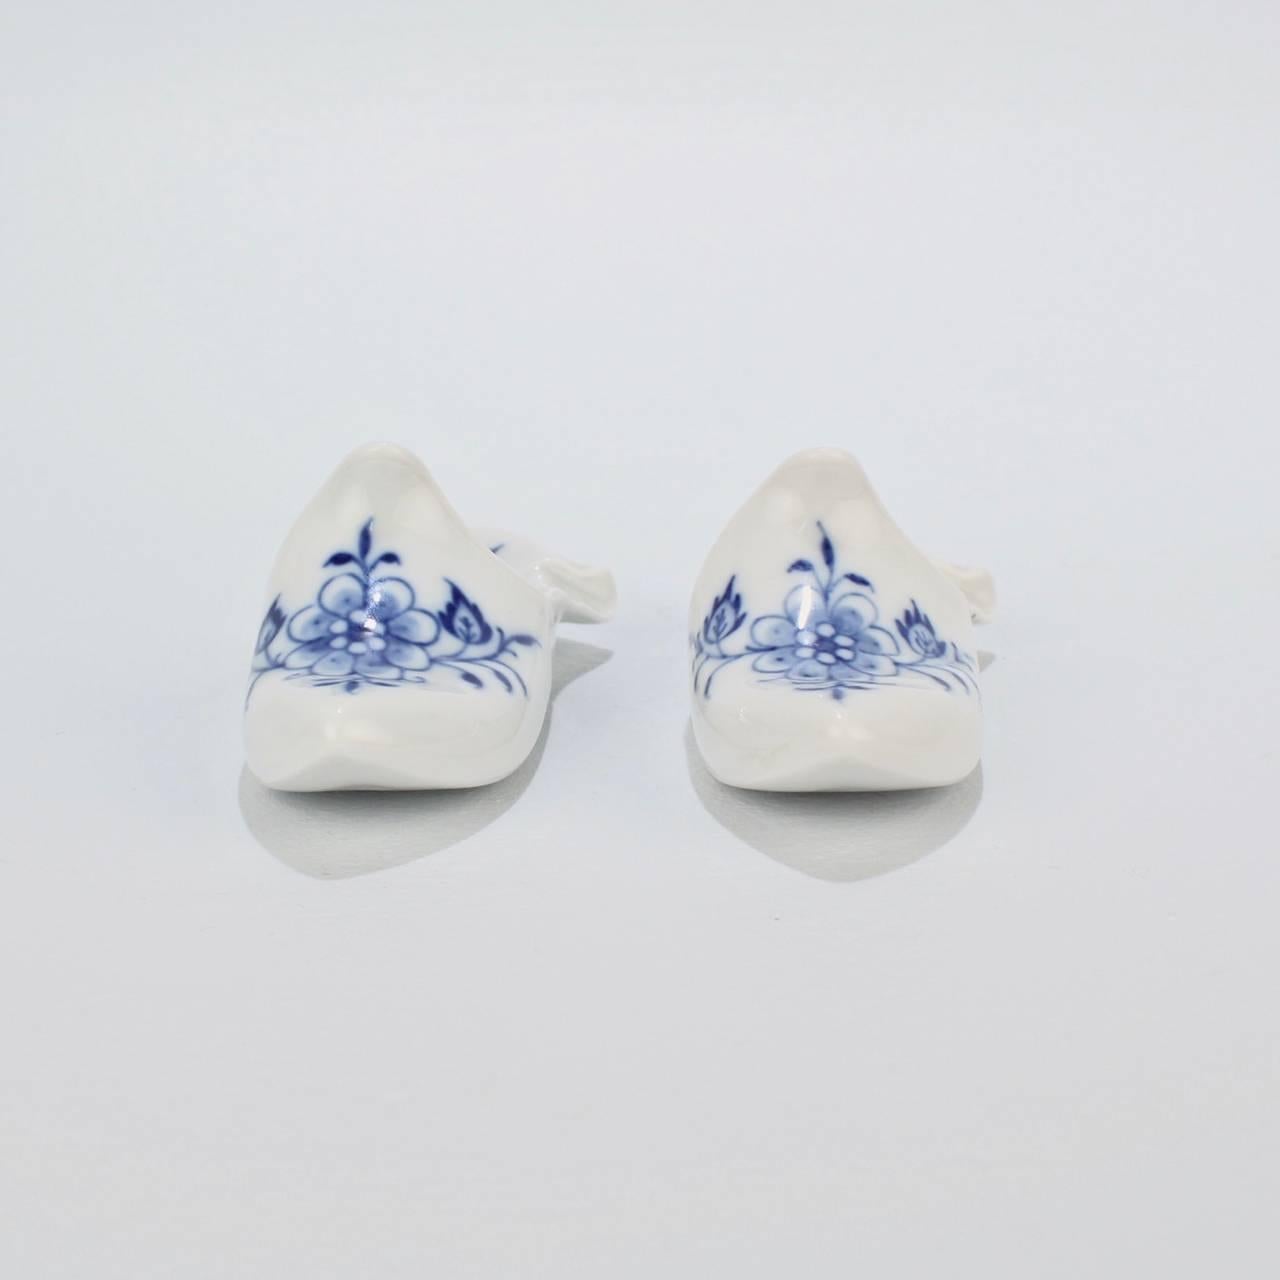 20th Century Two Vintage Meissen Porcelain Blue Onion Shoe or Slipper Form Paperweights